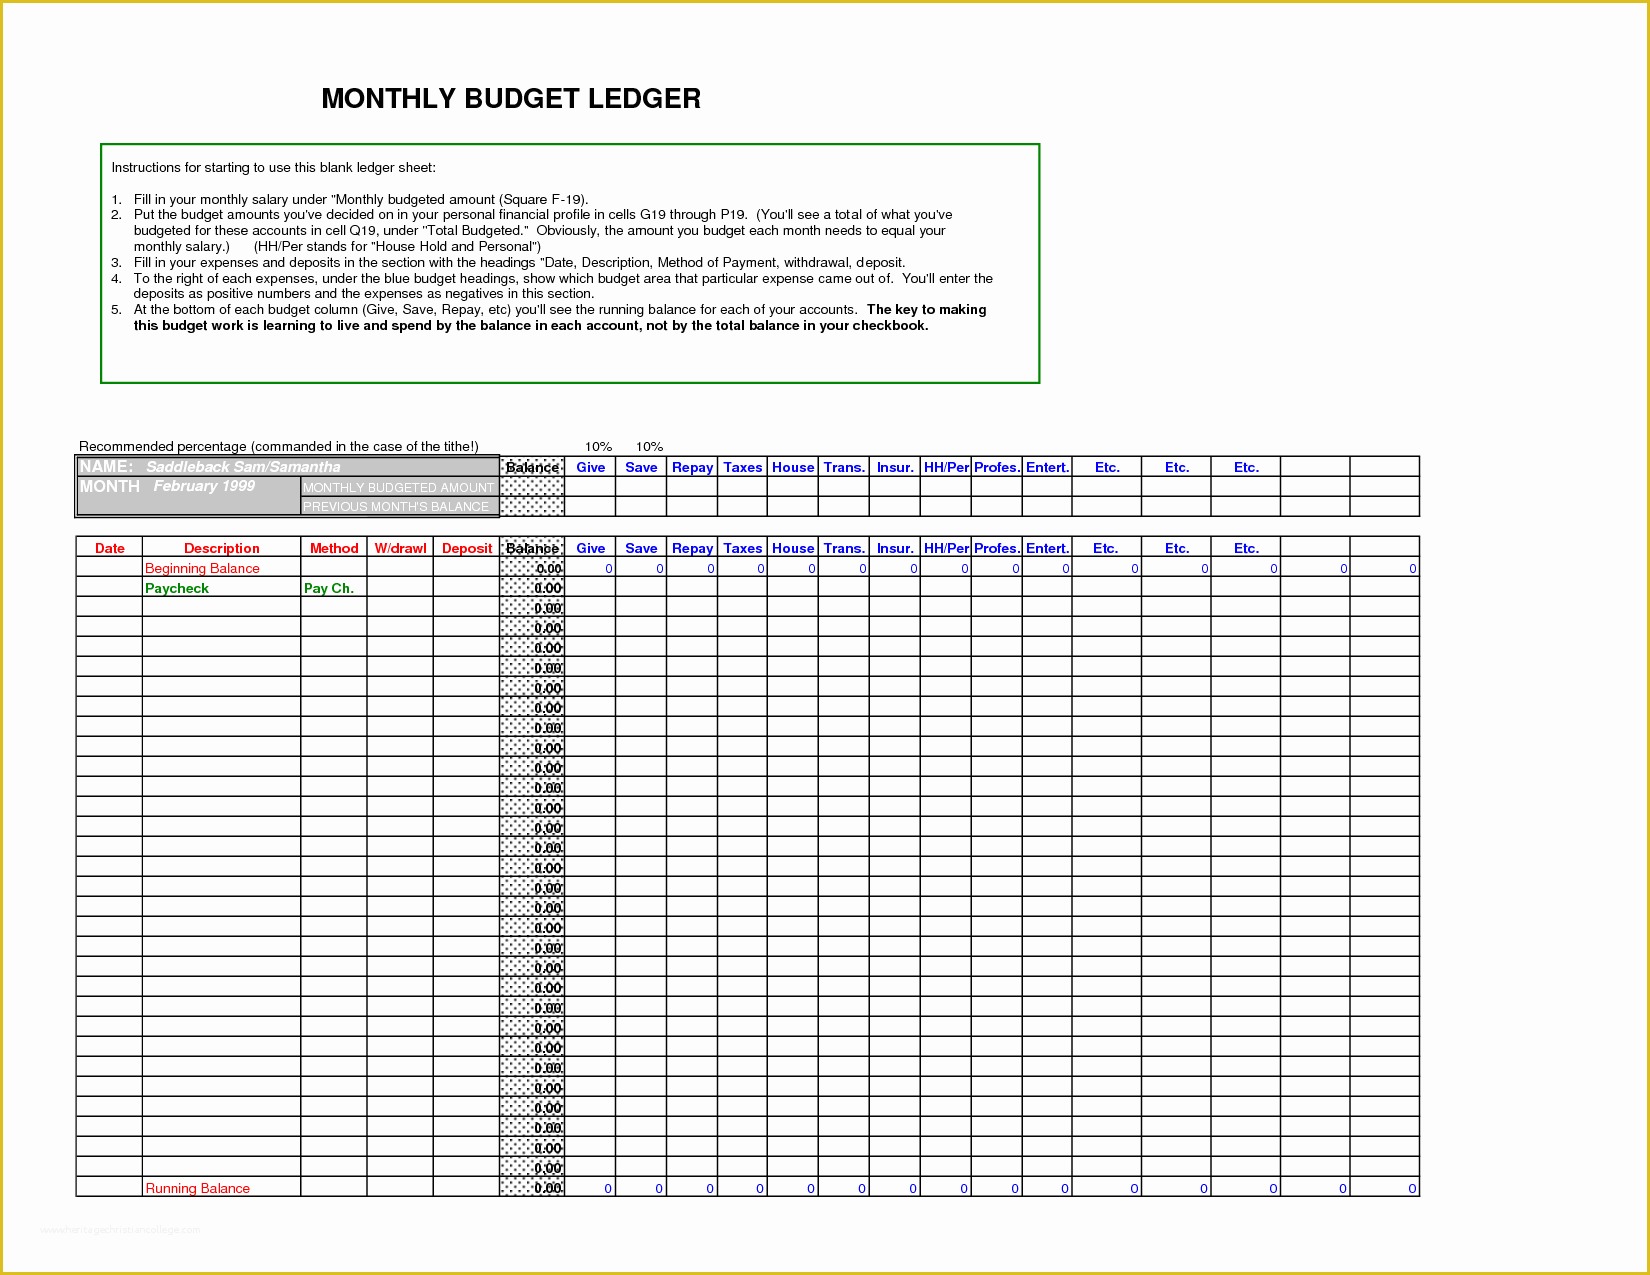 Business Ledger Template Free Of General Ledger Template